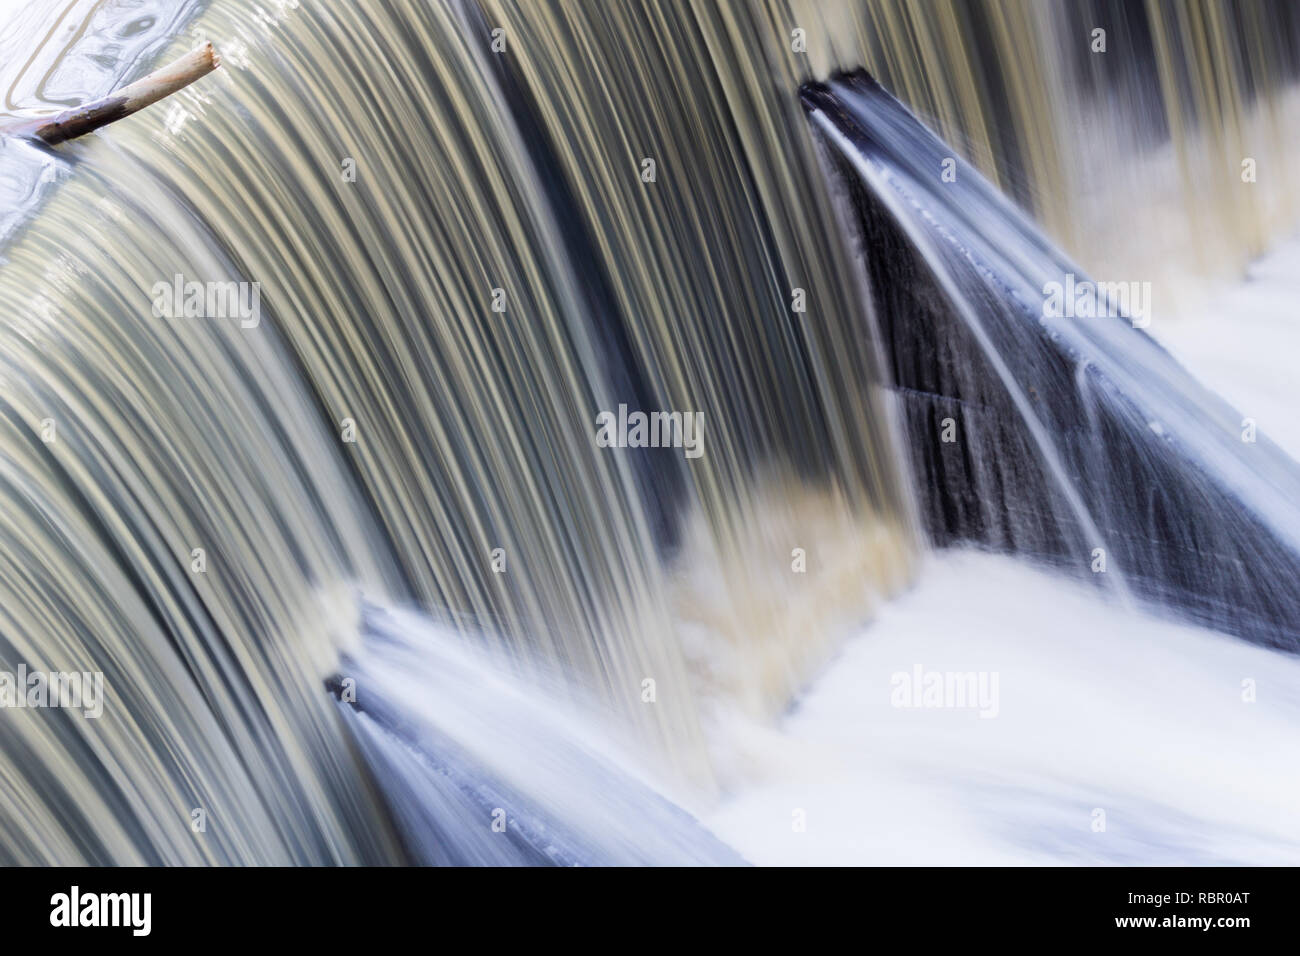 Fast flowing water over a concrete dam, California; long exposure Stock Photo